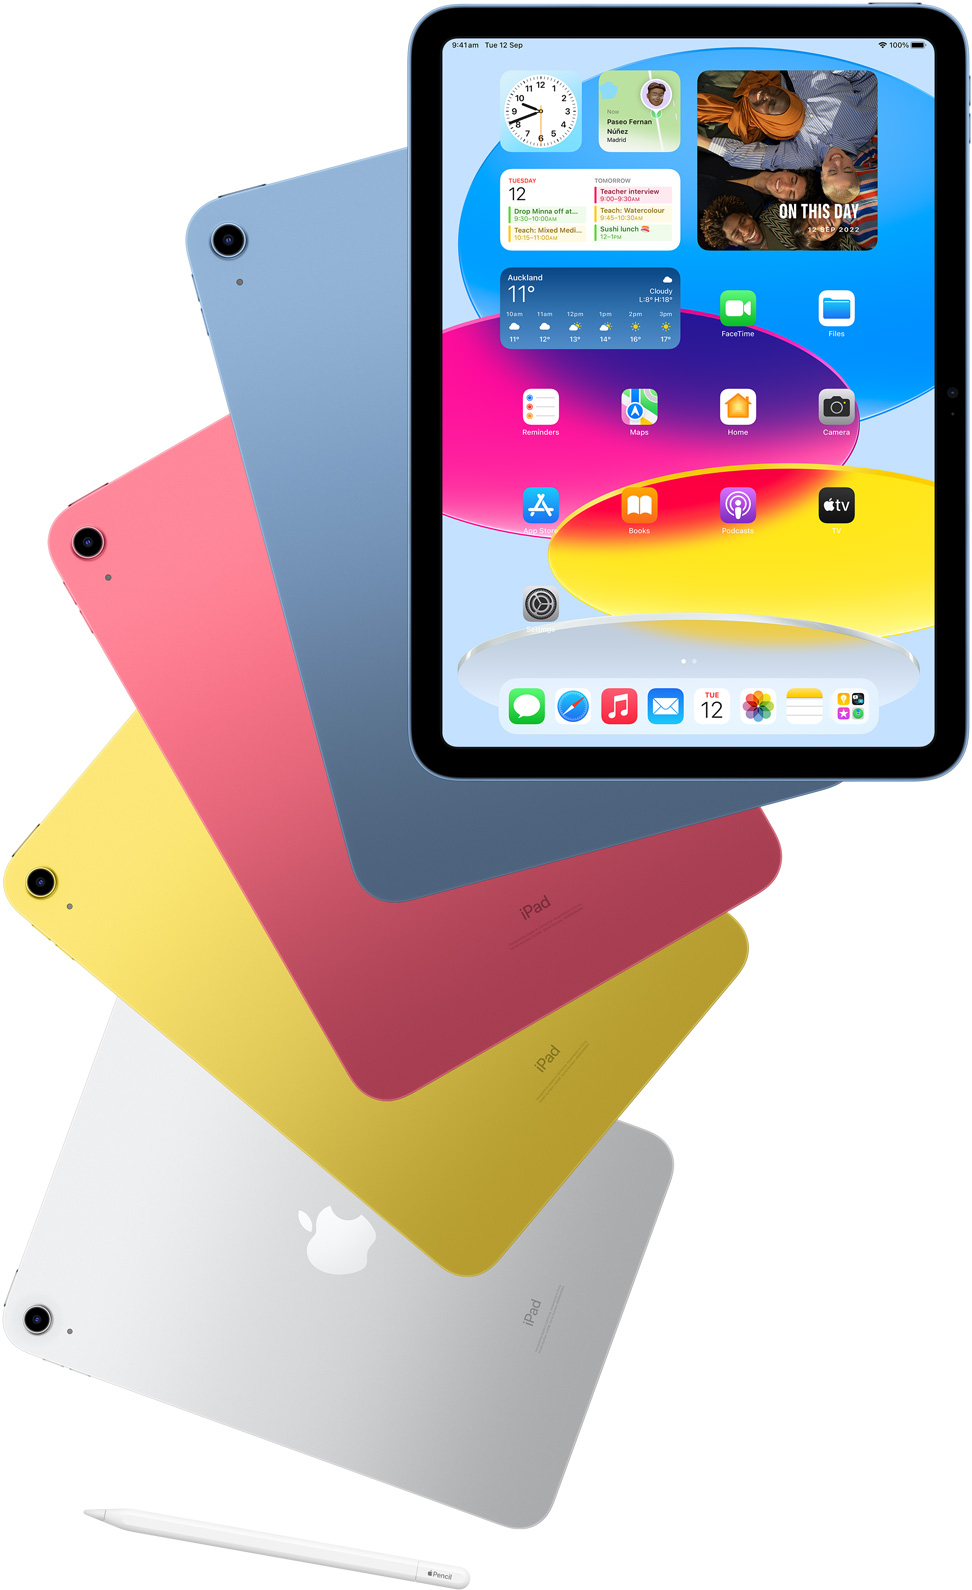 Front view iPad shows Home Screen with Blue, Pink, Yellow and Silver rear-facing iPad devices behind it. An Apple Pencil sits near the arranged iPad models.